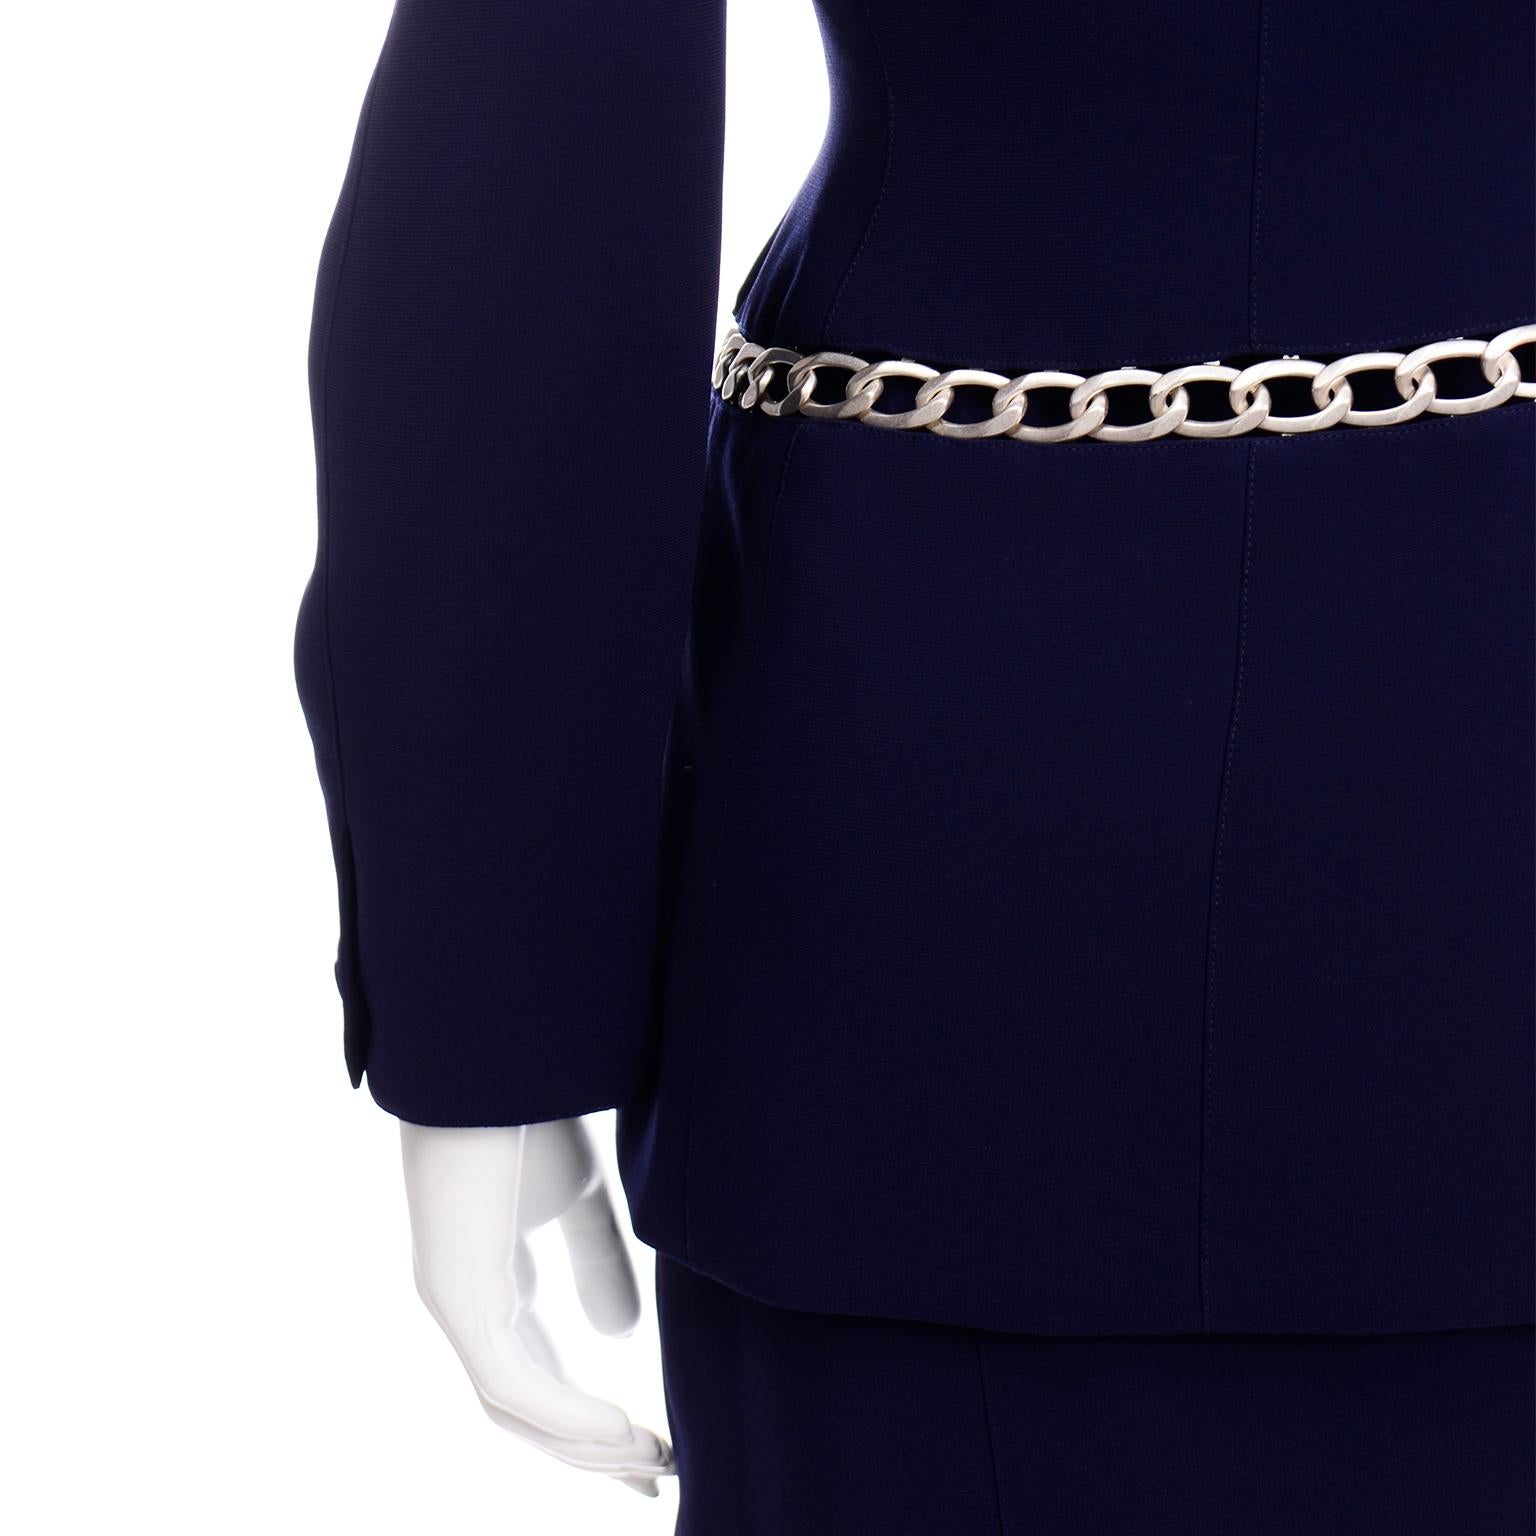 Thierry Mugler Vintage Navy Blue Skirt & Jacket Suit With Chain Detail 1